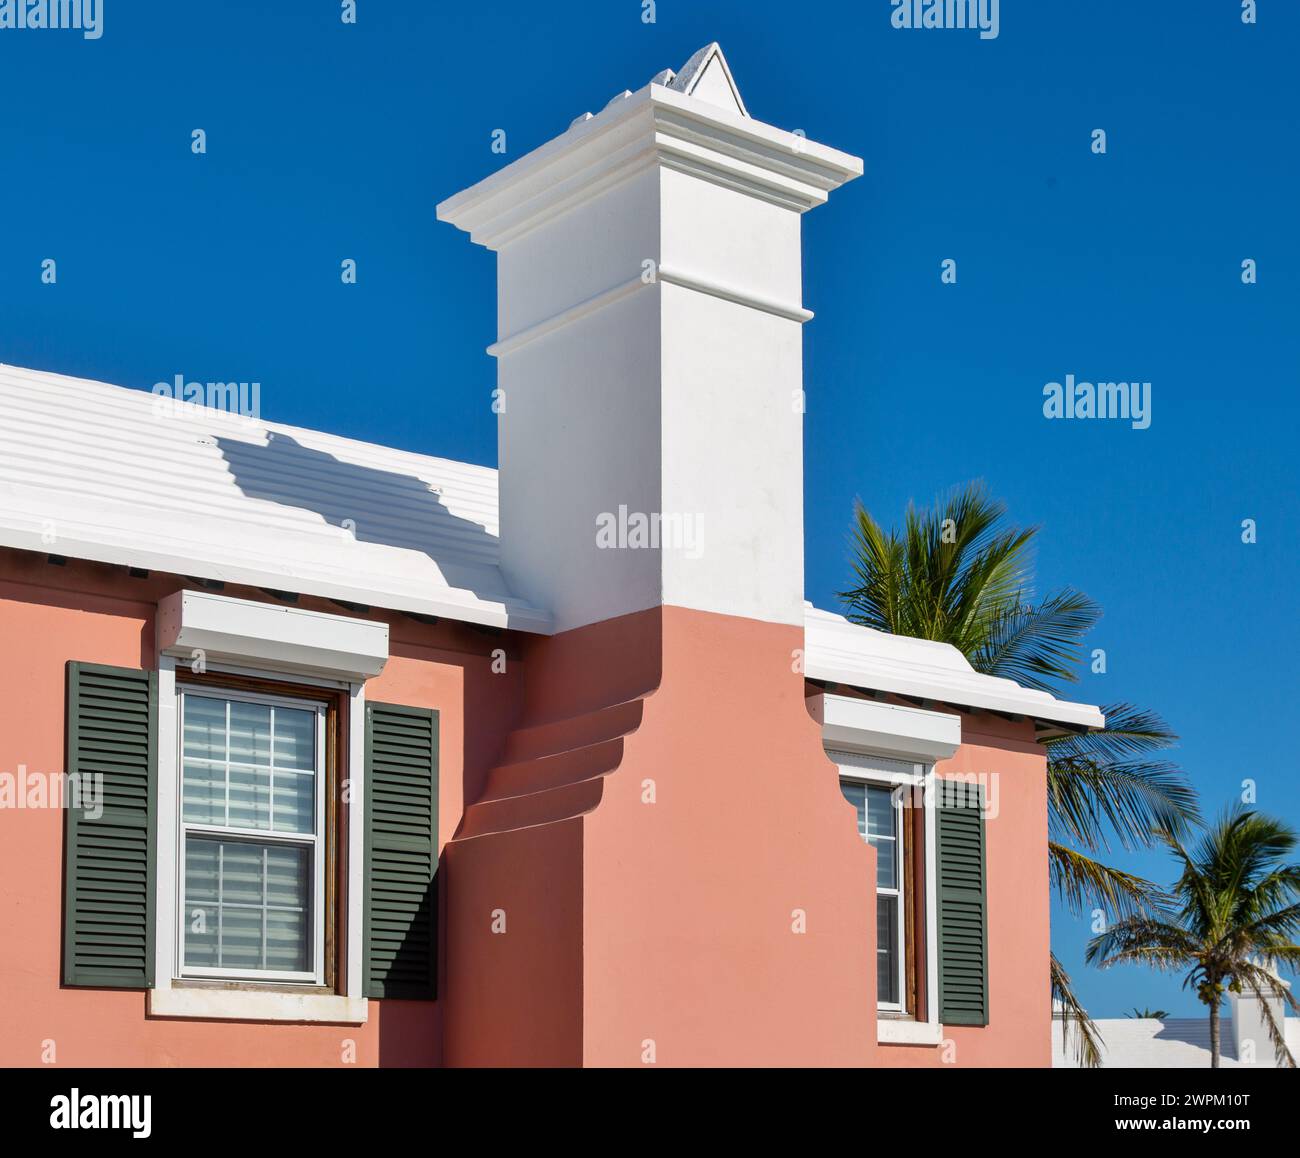 Typical Bermuda architecture, building painted in pastel colours, with white stepped roof designed to catch rainwater for storage in underground tanks Stock Photo